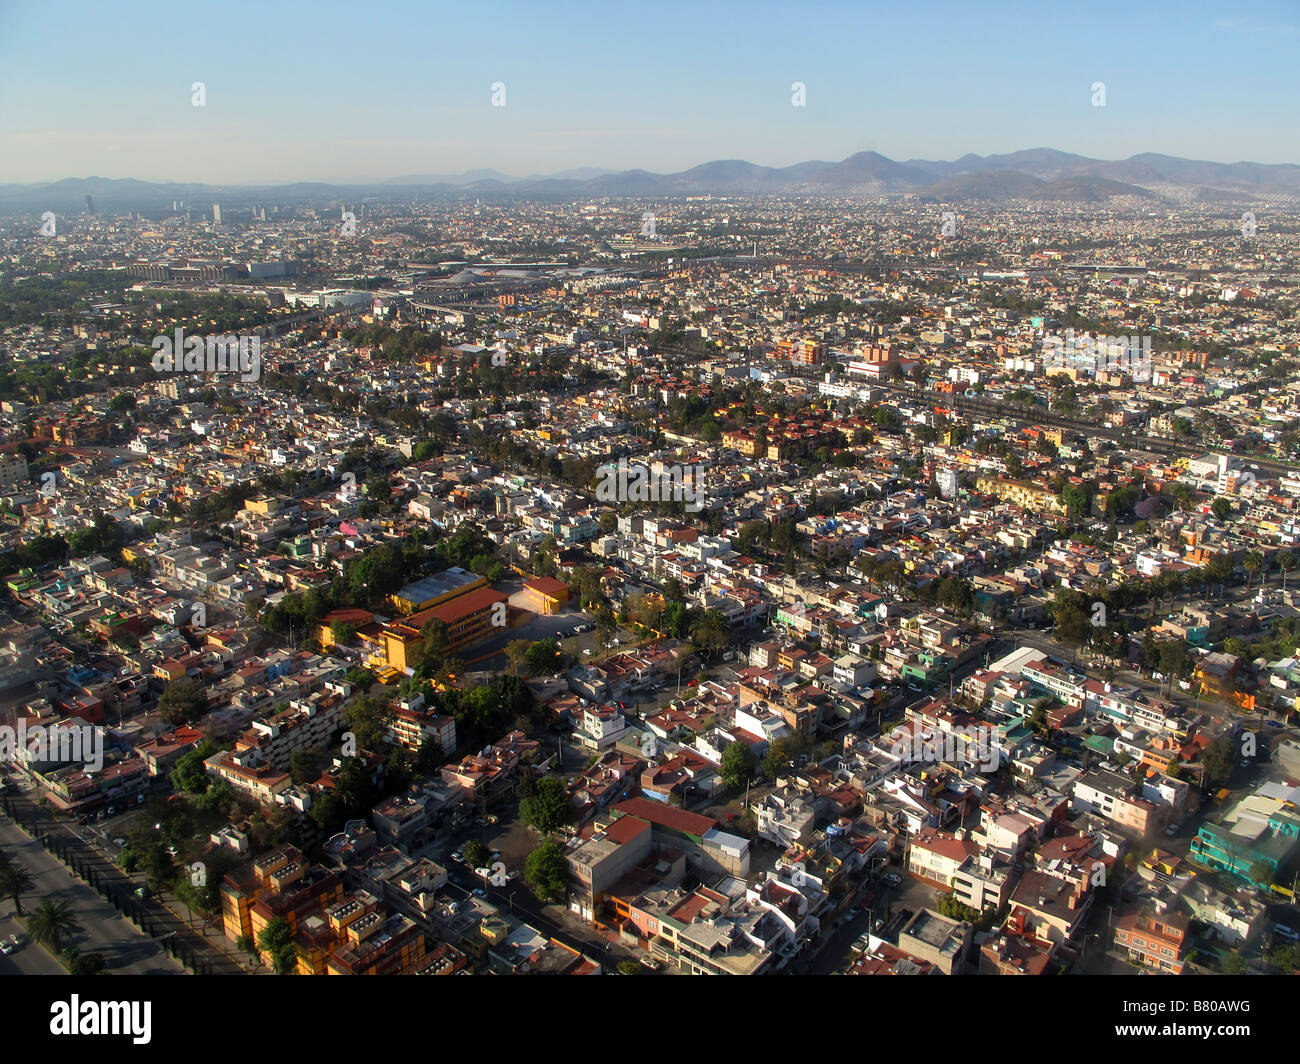 Aerial photograph showing Mexico City the capital city of Mexico Greater Mexico City has a population of 19 million people Stock Photo